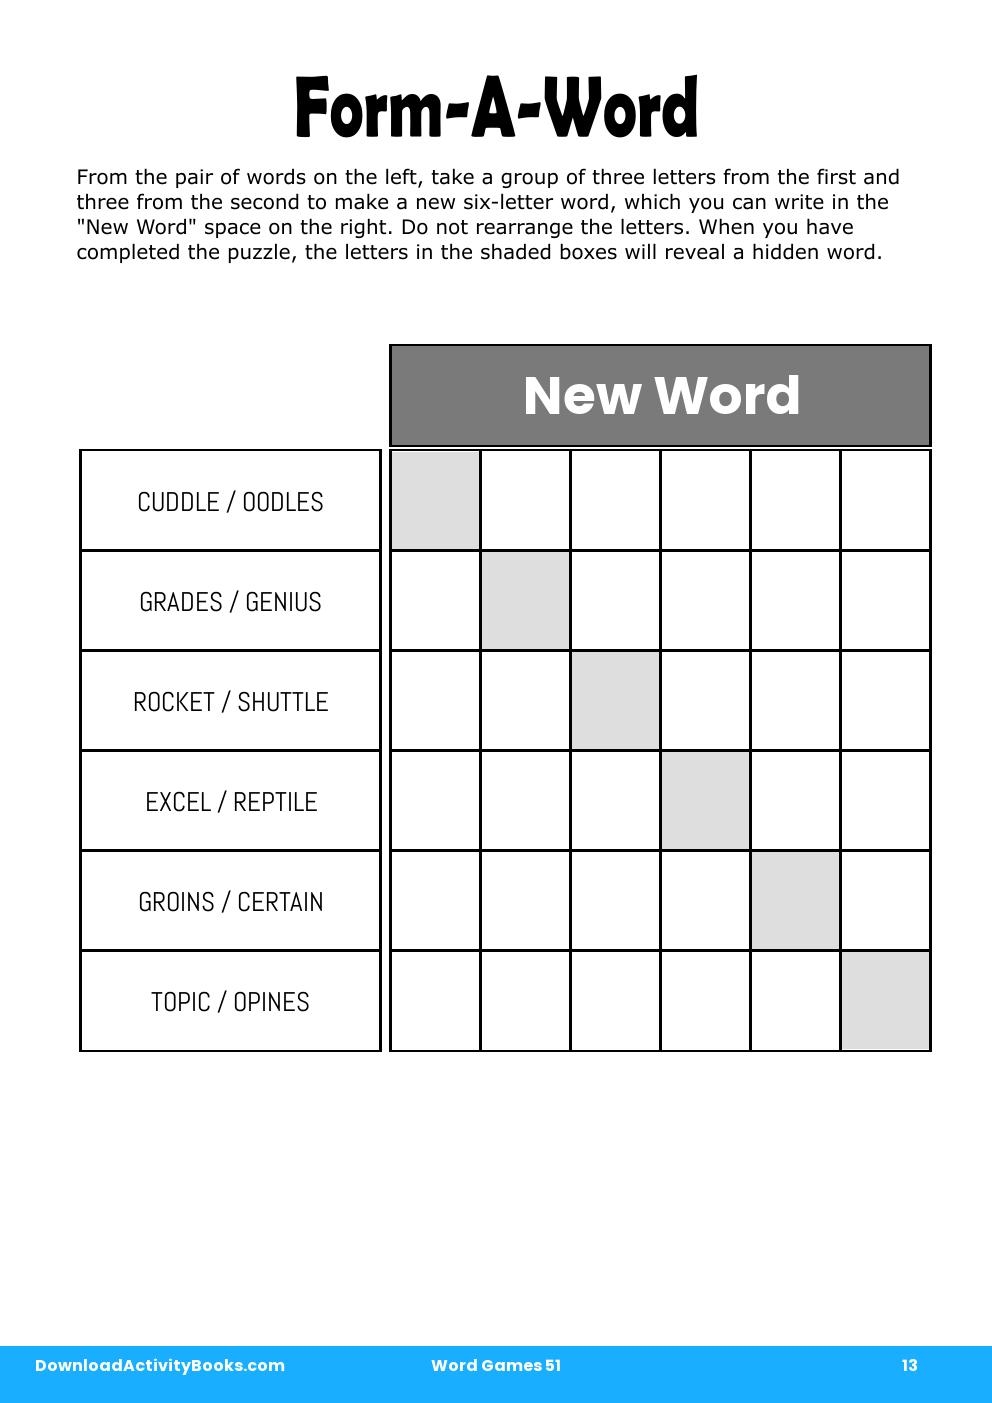 Form-A-Word in Word Games 51